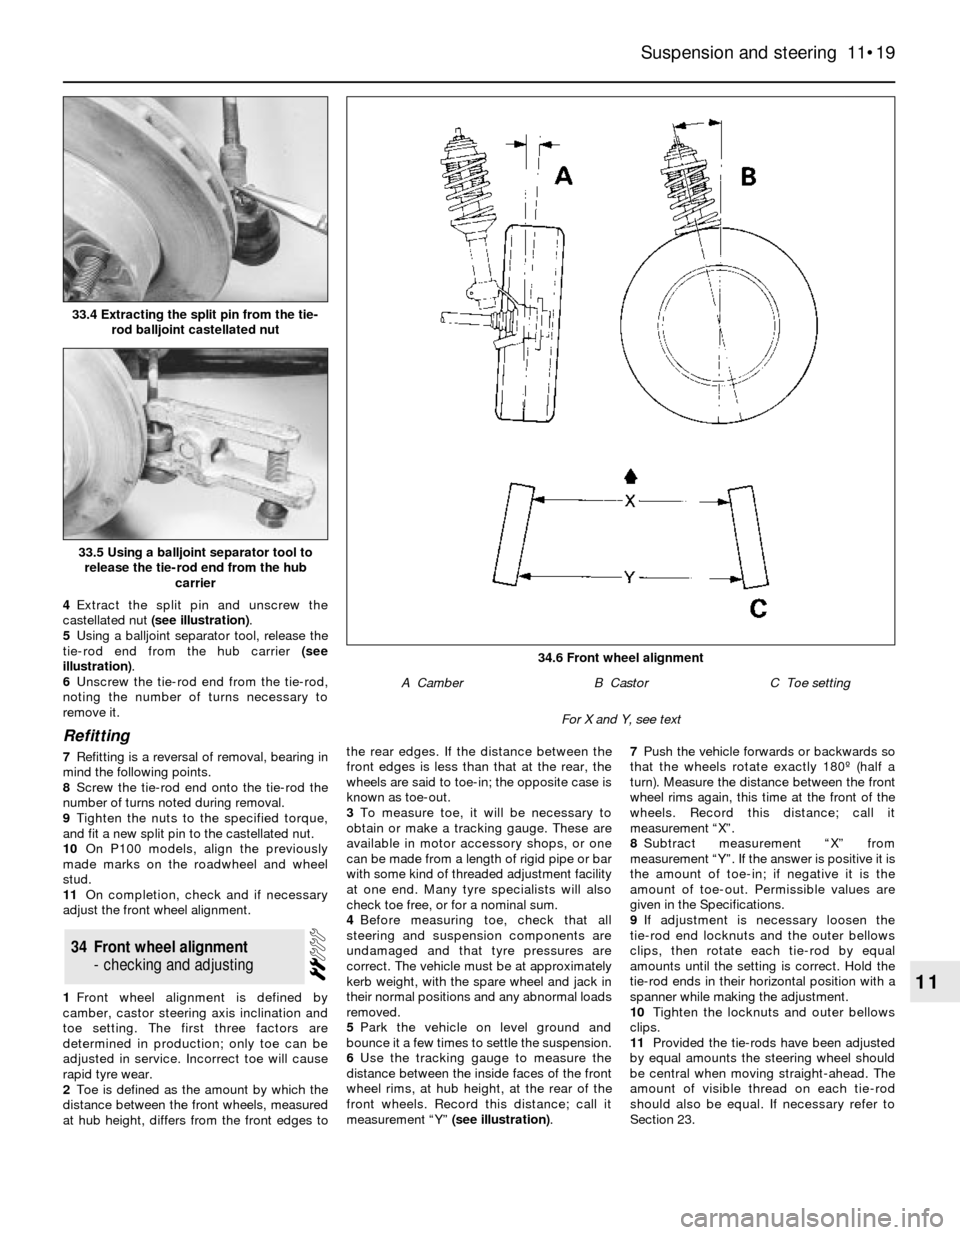 FORD SIERRA 1993 2.G Suspension And Steering Workshop Manual 4Extract the split pin and unscrew the
castellated nut (see illustration).
5Using a balljoint separator tool, release the
tie-rod end from the hub carrier (see
illustration).
6Unscrew the tie-rod end 